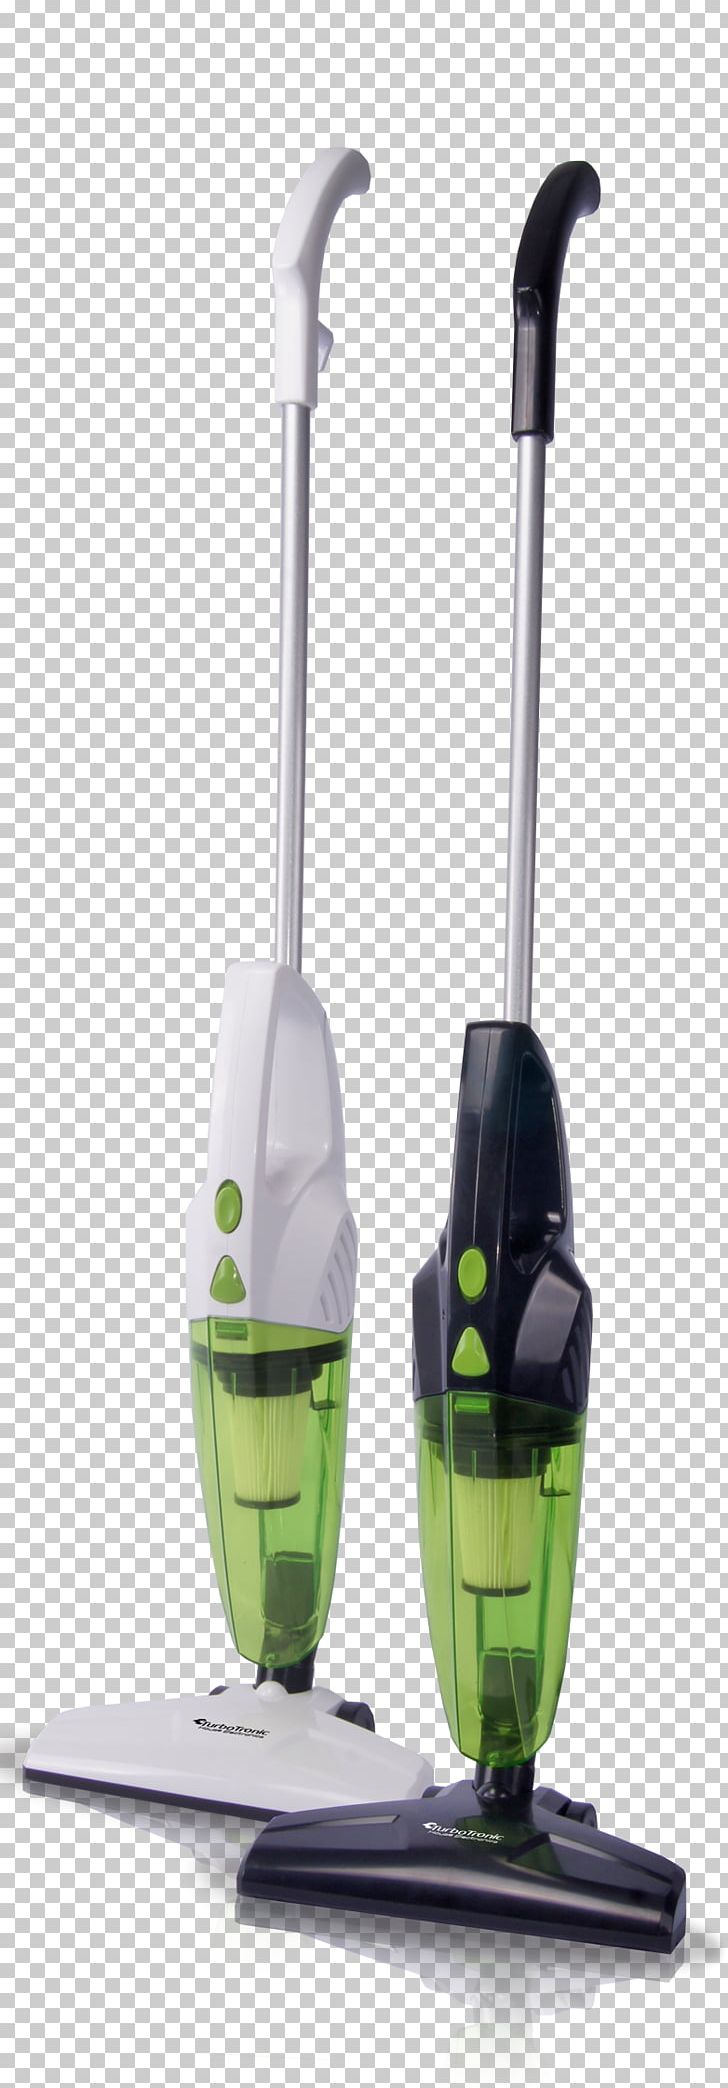 Vacuum Cleaner Broom Humidifier PNG, Clipart, Air, Black Decker Dustbuster, Broom, Carpet, Cleaner Free PNG Download